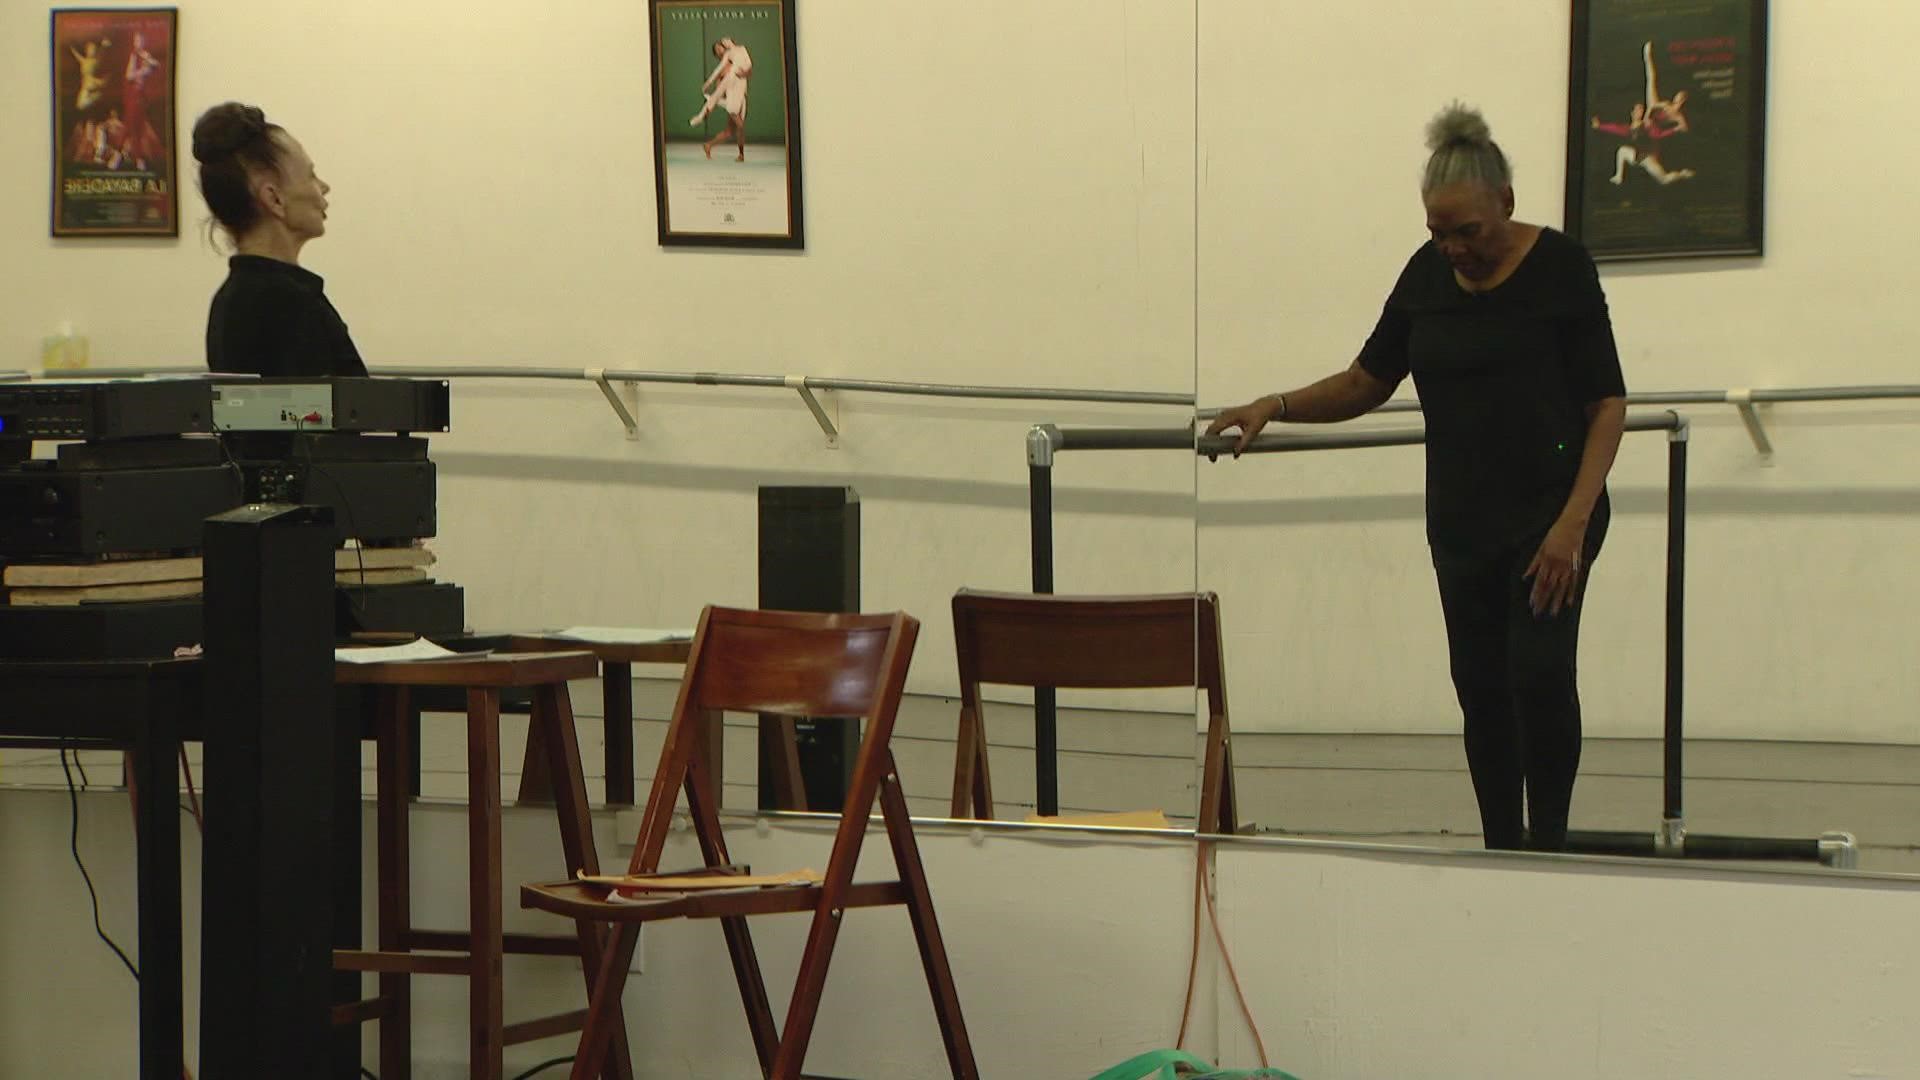 Robbed of her sight 28 years ago, Brenda Mosby has a vision for her future by learning ballet and giving others a new perspective.